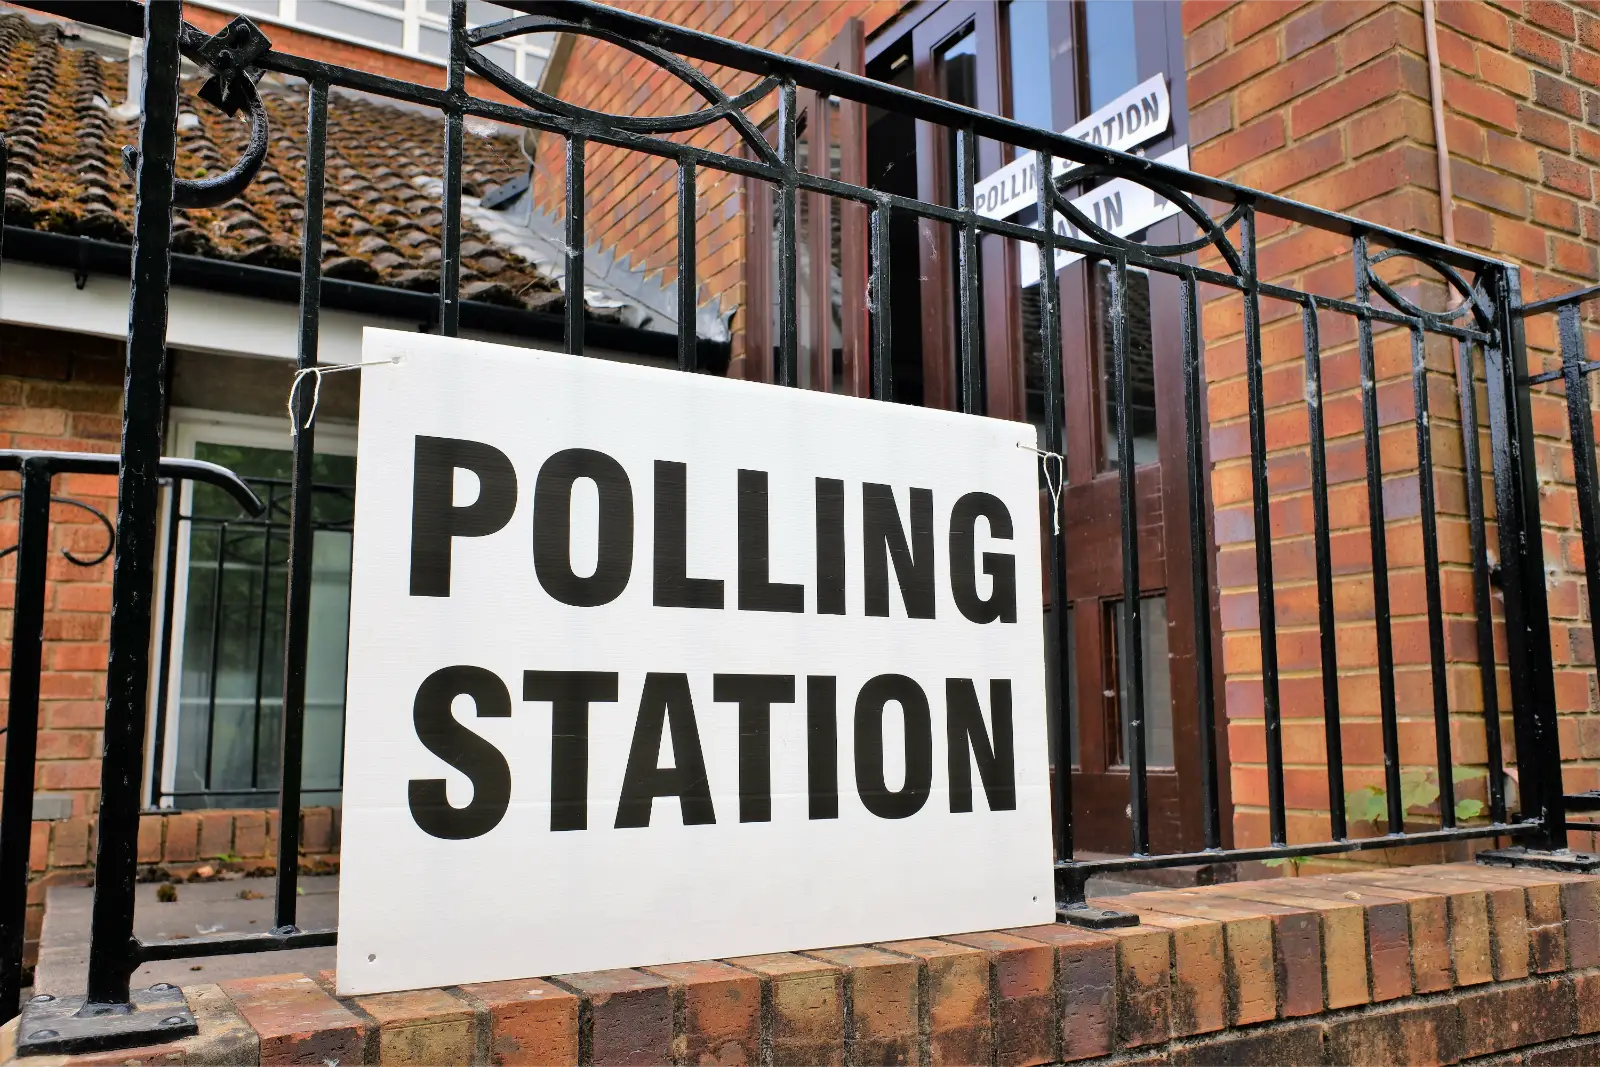 Who can vote at a polling station?